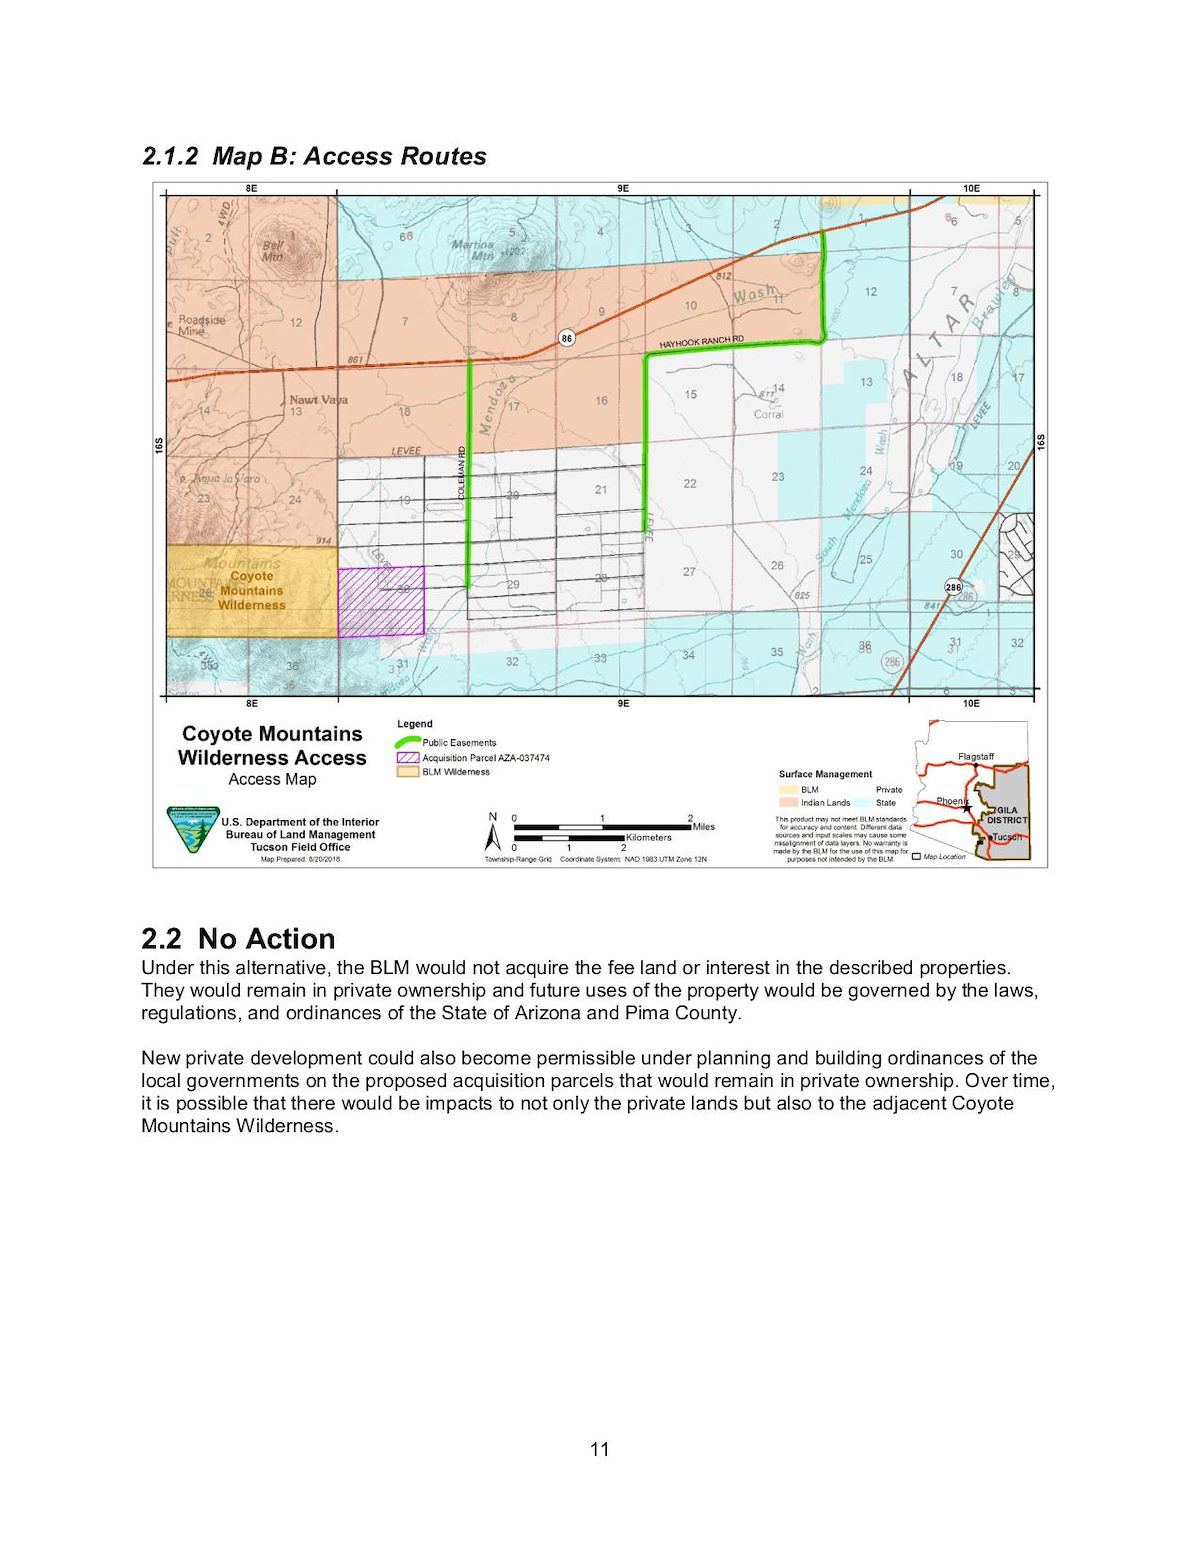 BLM Coyote Mountains NE Access Land Acquisition Environmental Assessment - Page 11